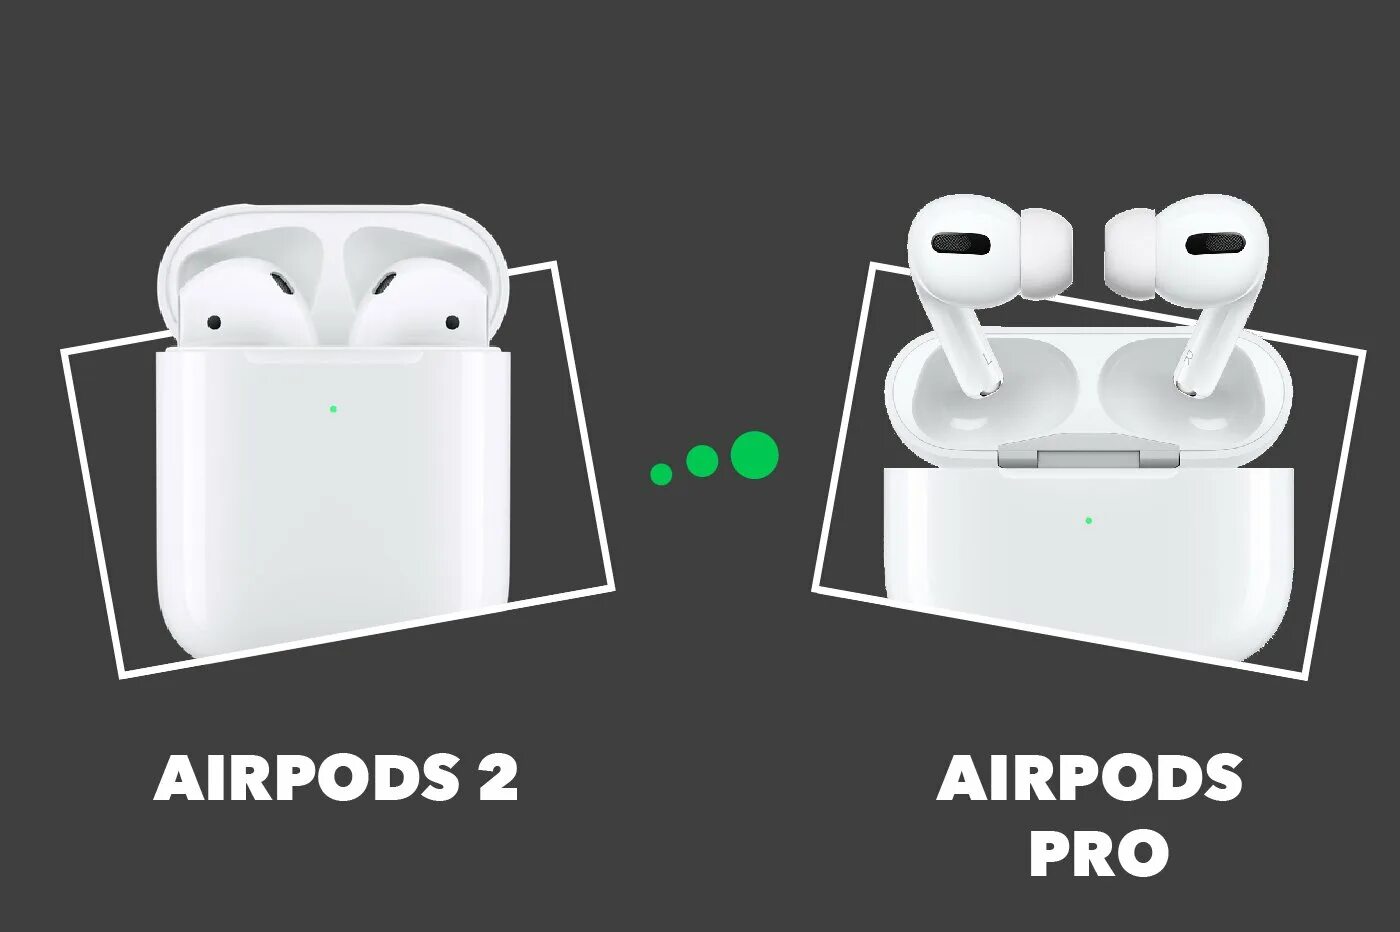 Работа airpods. Apple AIRPODS Pro vs pro2. AIRPODS Pro vs Pro 2. AIRPODS Pro 2 vs AIRPODS Pro. Air pods 1 vs Air pods 2.